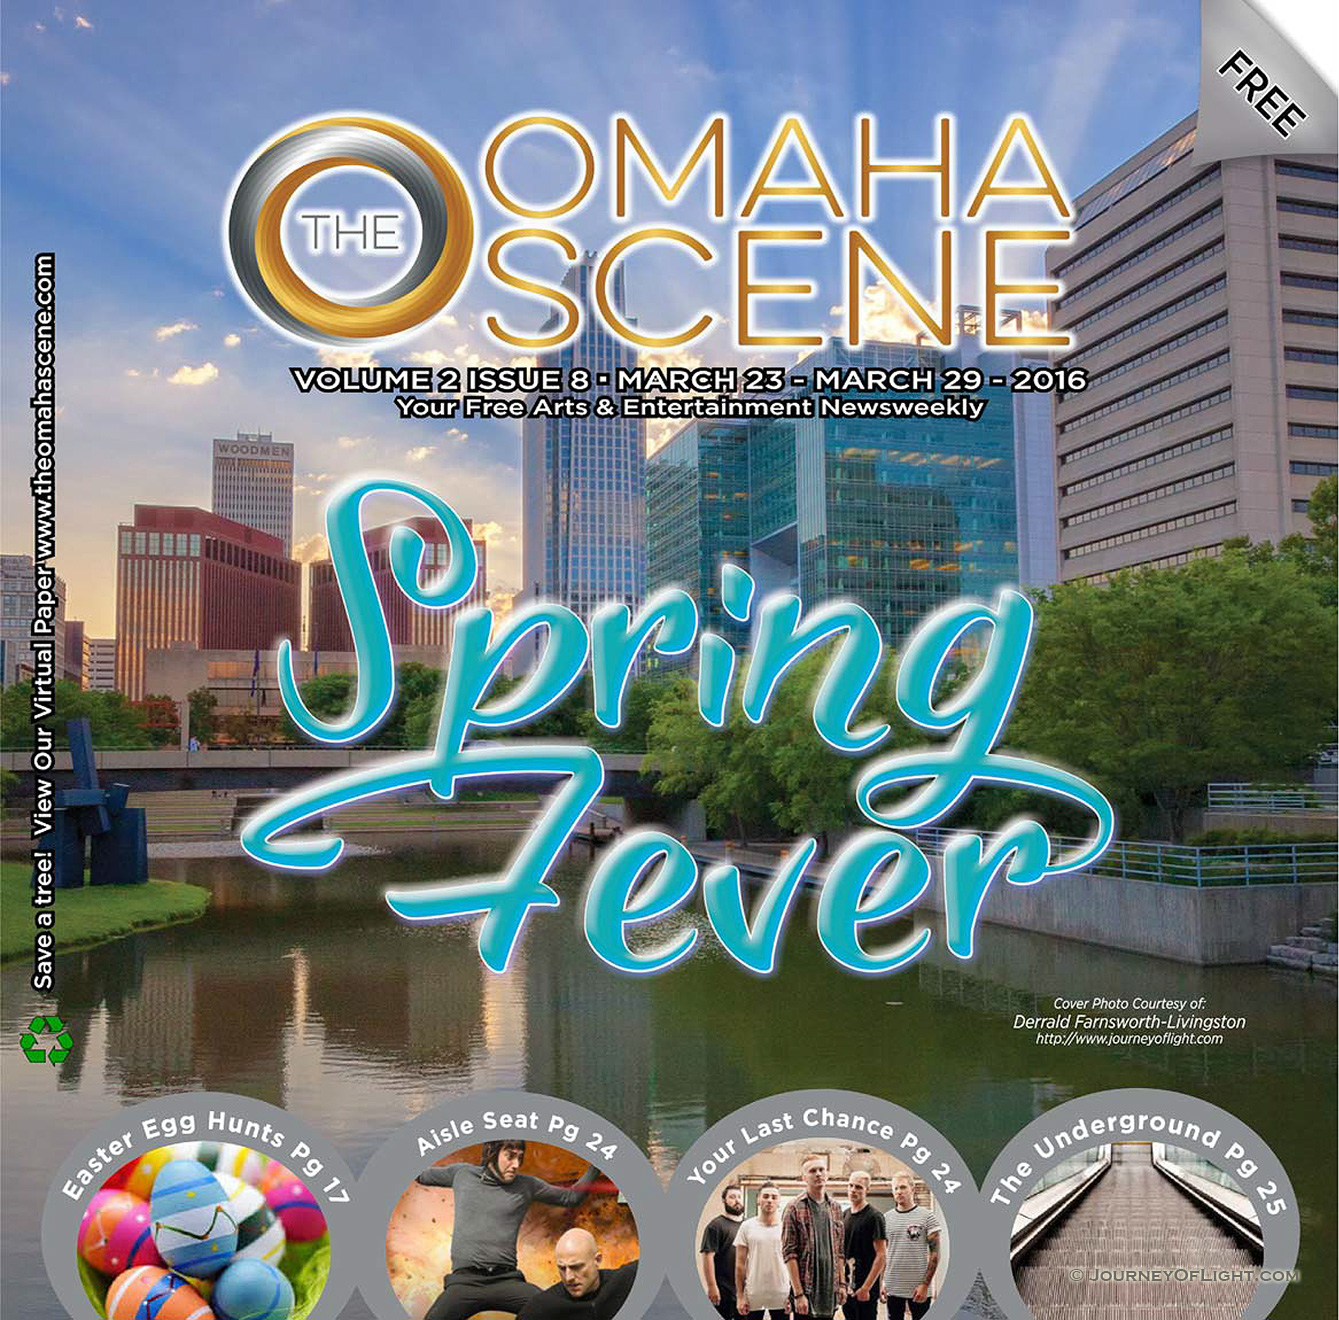 The Omaha Scene - Cover Photo. -  Picture